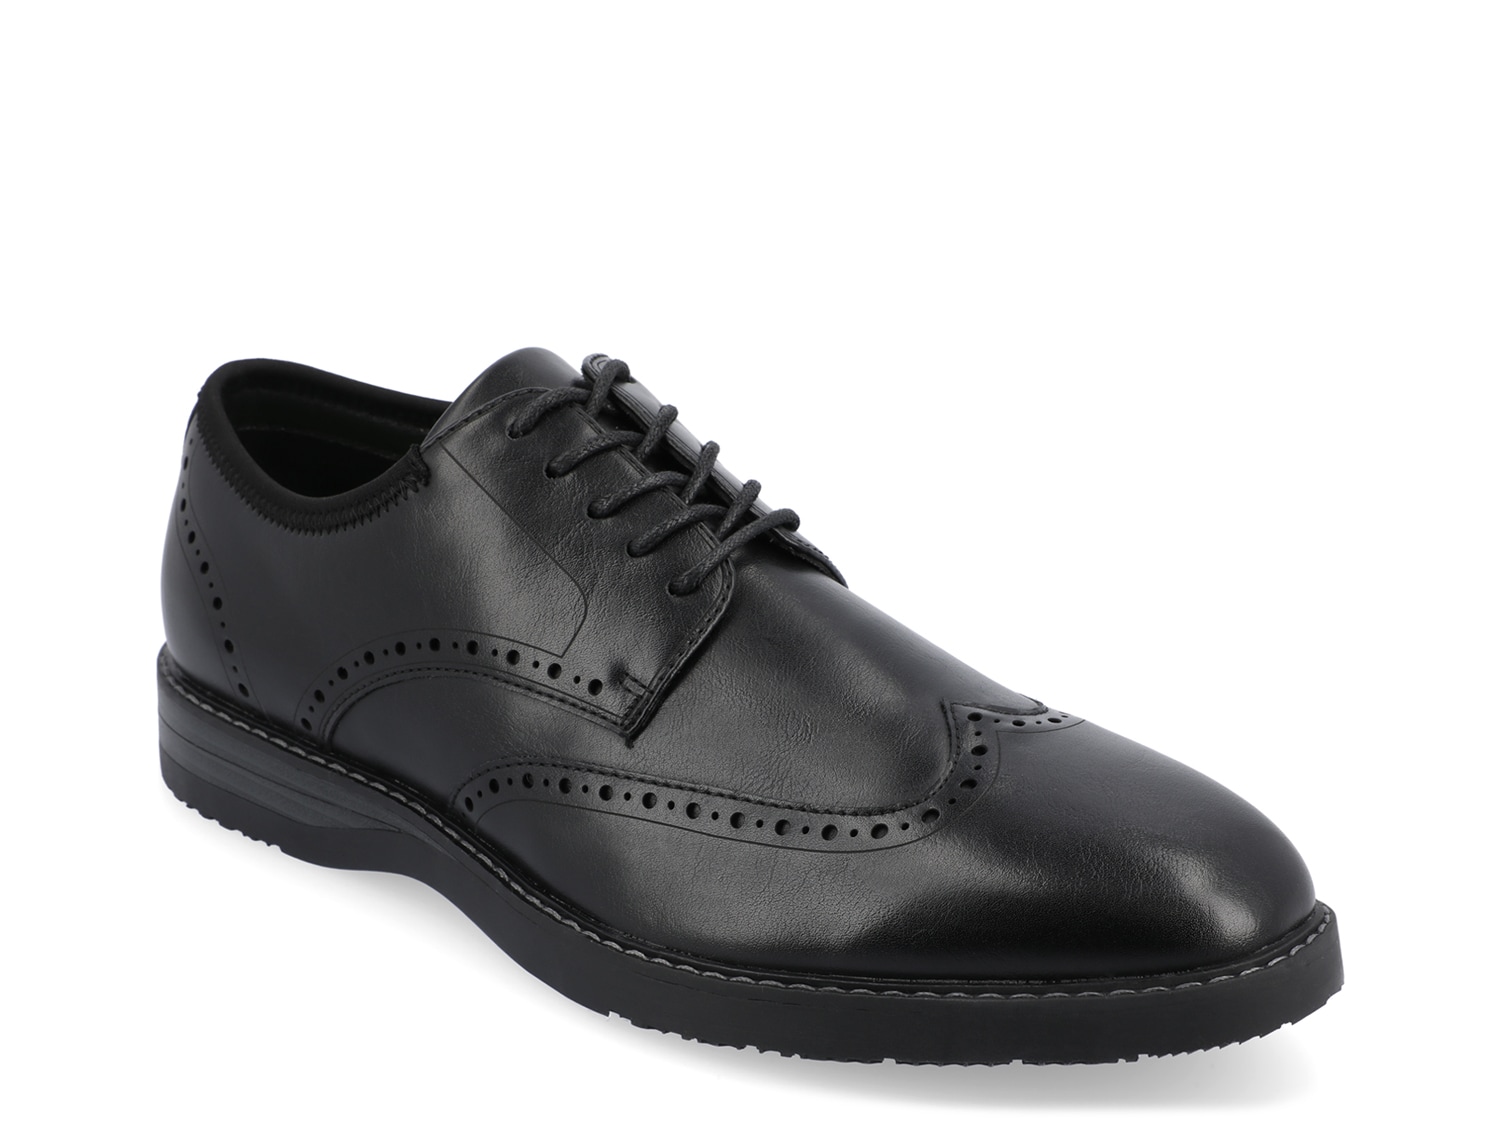 Vance Co. Ozzy Wingtip Oxford - Free Shipping | DSW